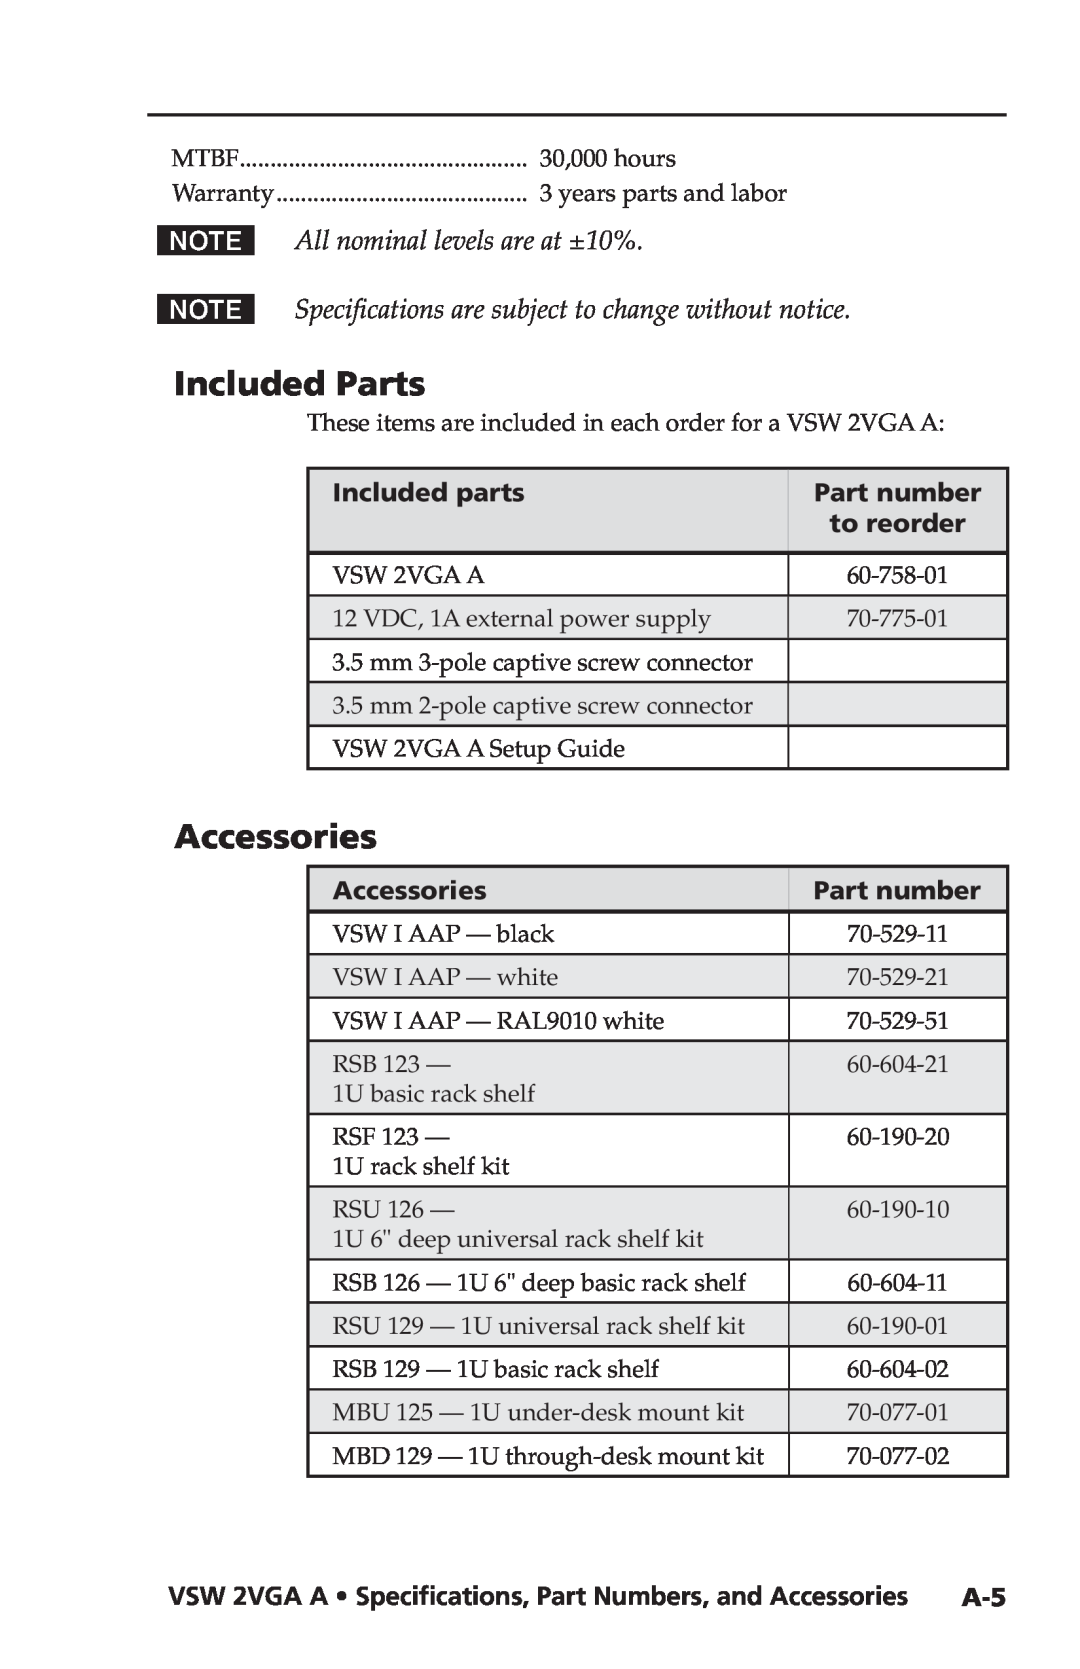 Extron electronic VSW 2VGA A Included Parts, Accessories, N All nominal levels are at ±10%, Included parts, Part number 